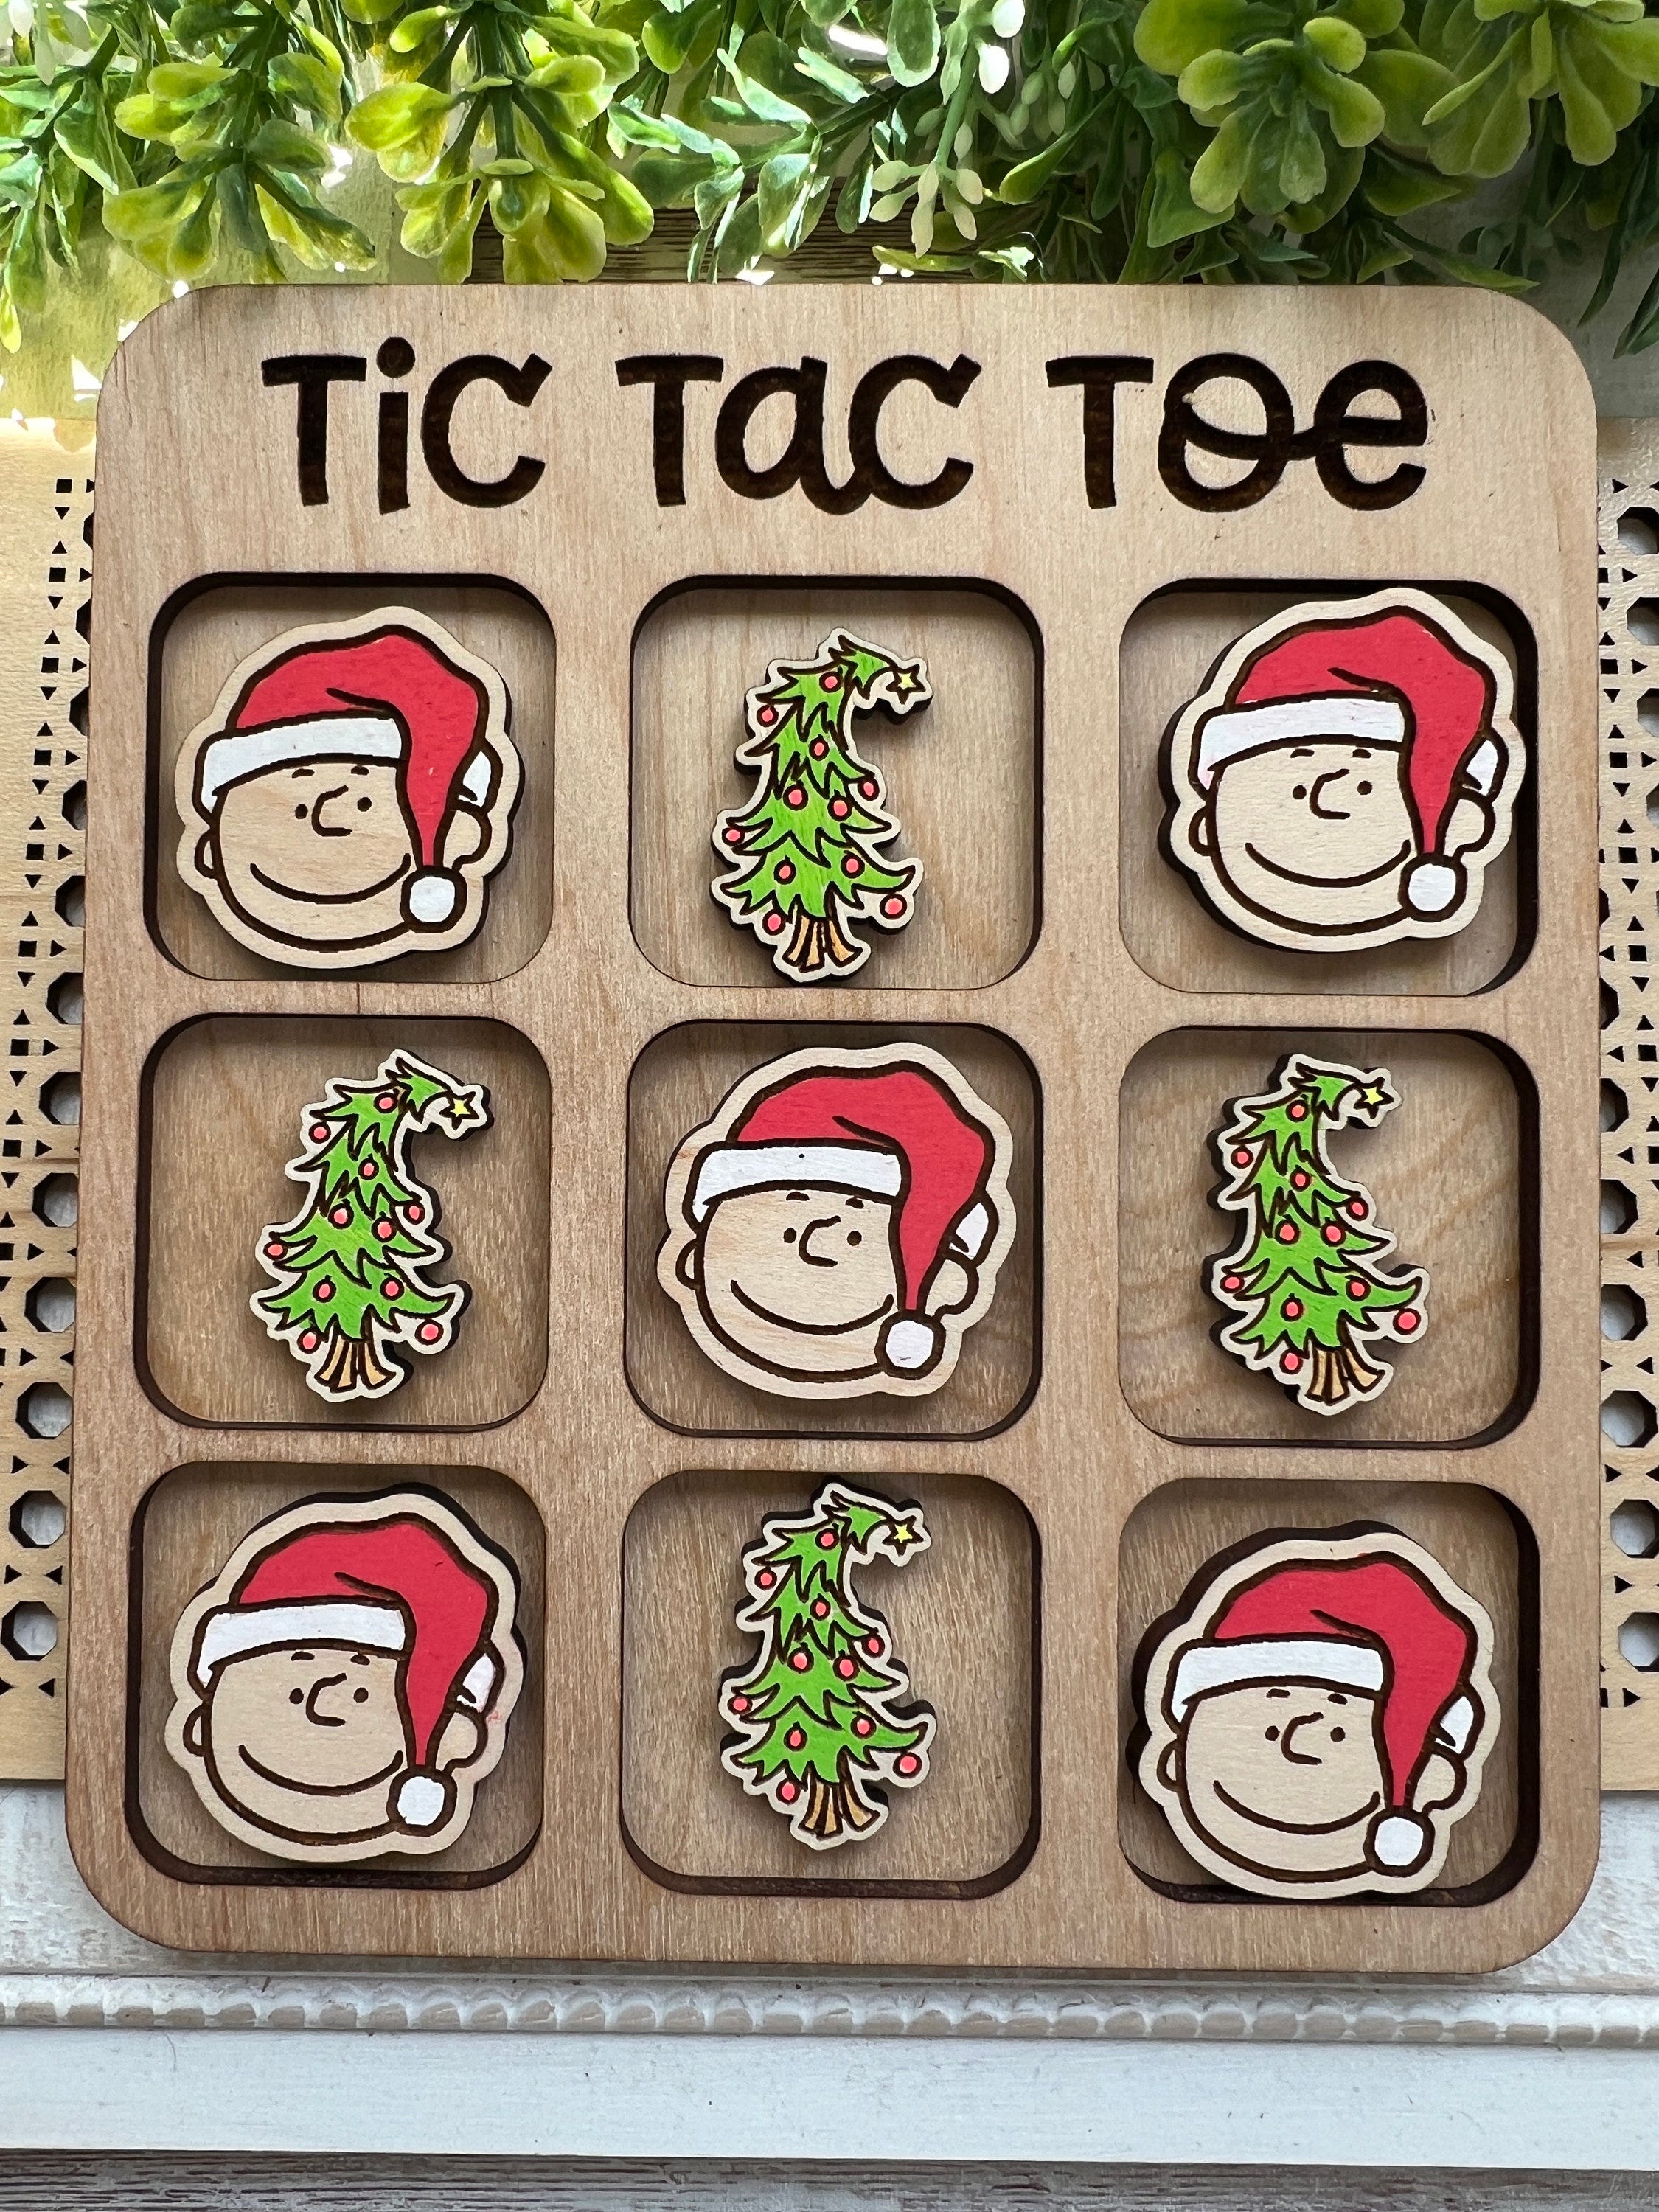 Comic character  Christmas with Santa hat and tree  hand painted wood tic tac toe board